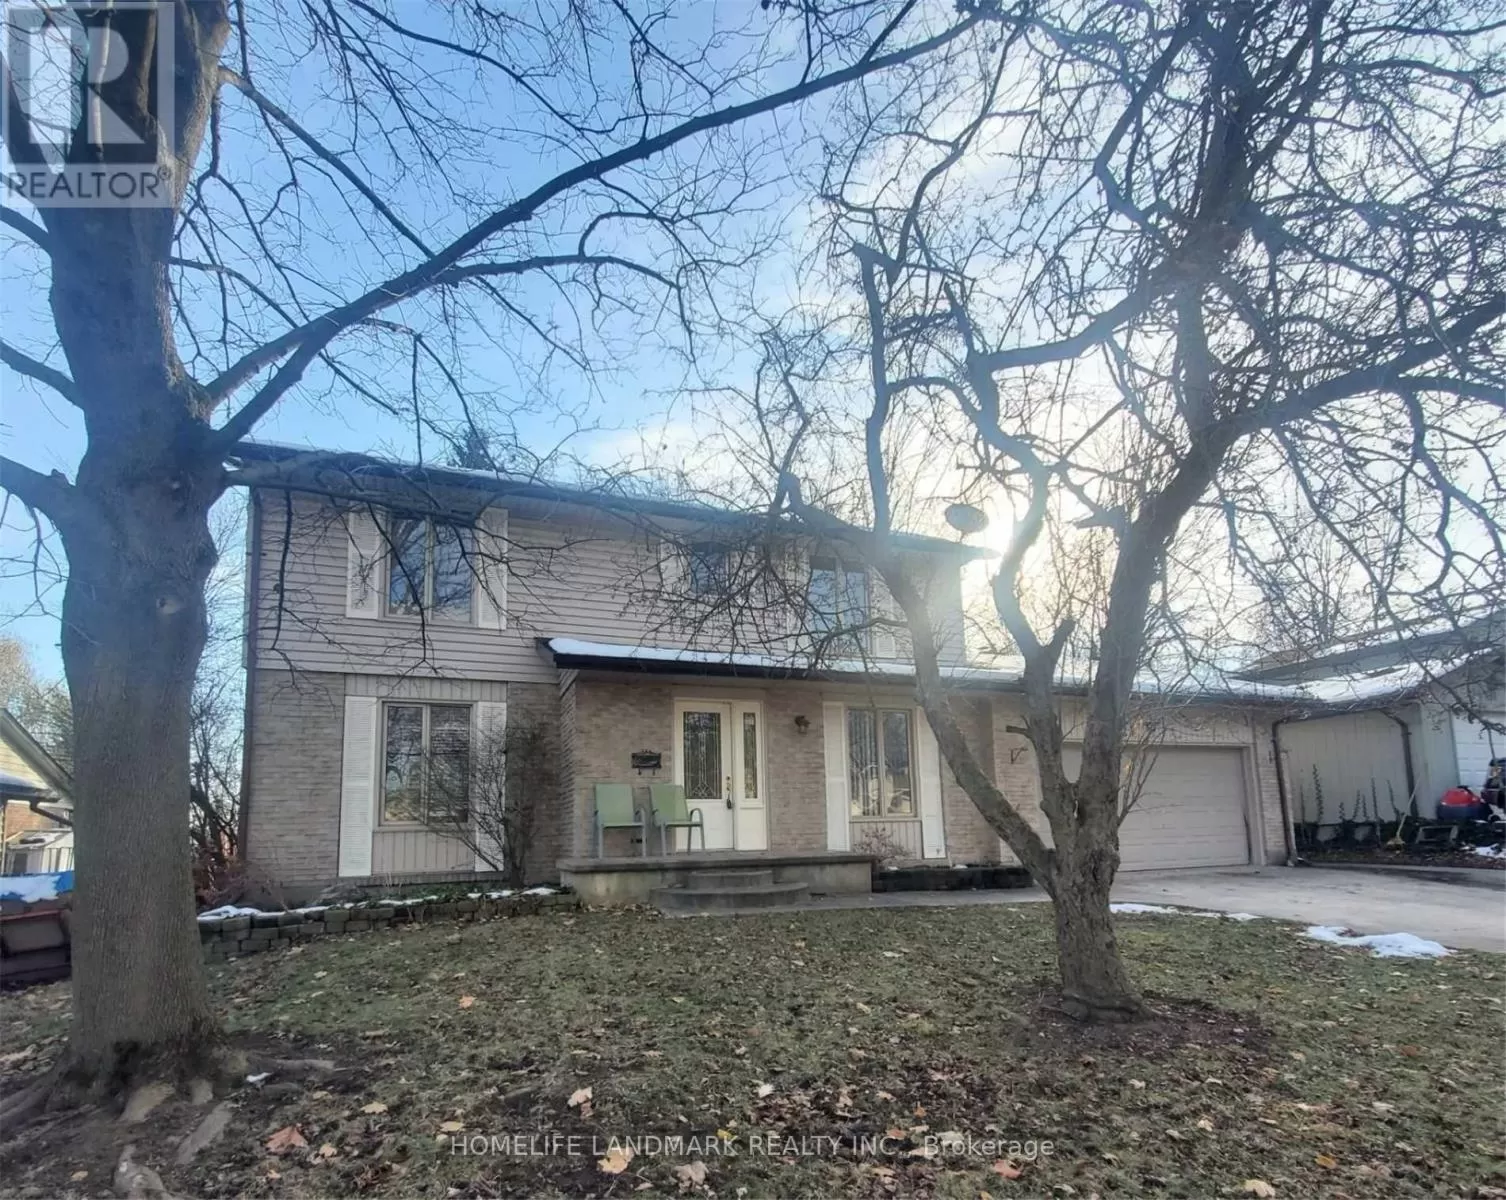 House for rent: 727 Barclay Road, London, Ontario N6K 1K4